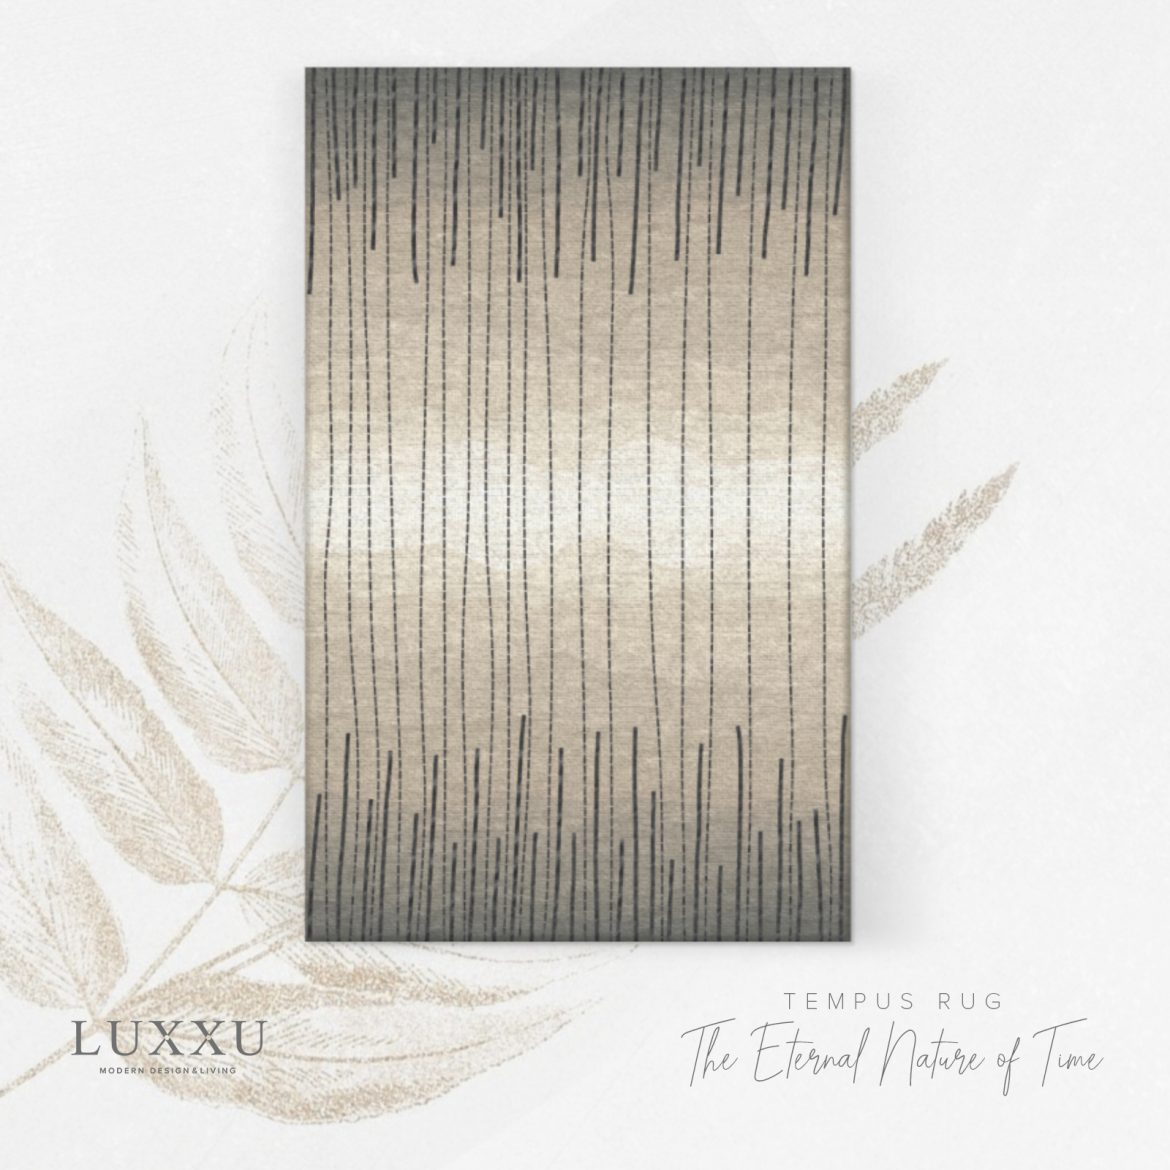 A Whole New World: Discover LUXXU's New Rug Collection